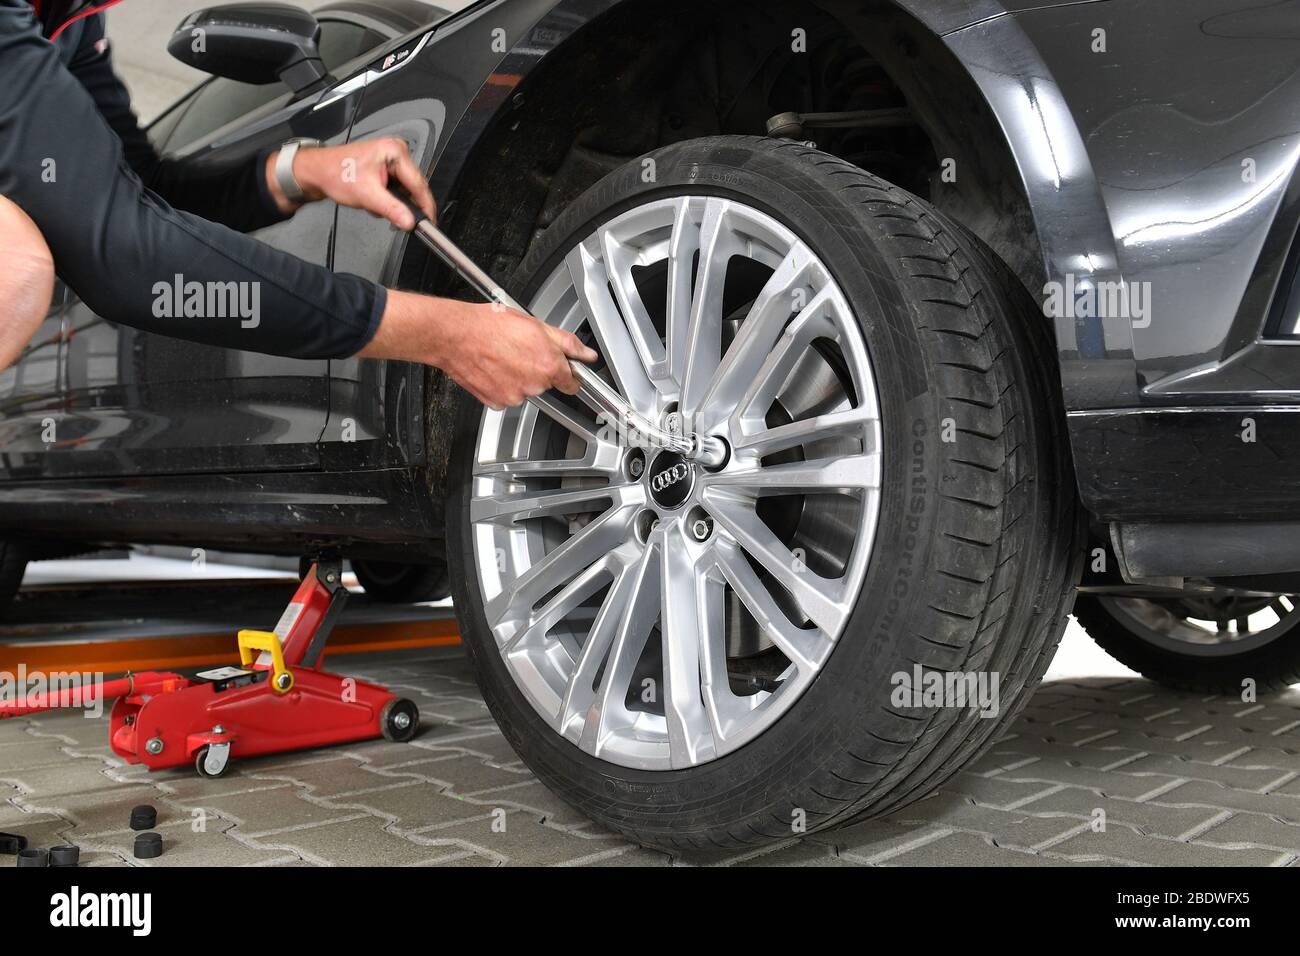 grafing deutschland 10th apr 2020 winter on summer tires corona crisis makes changing tires difficult change of wheels in the garage at home do it yourself the jack is attached the wheel bolts are loosened with a wheel wrench usage worldwide credit dpaalamy live news 2BDWFX5